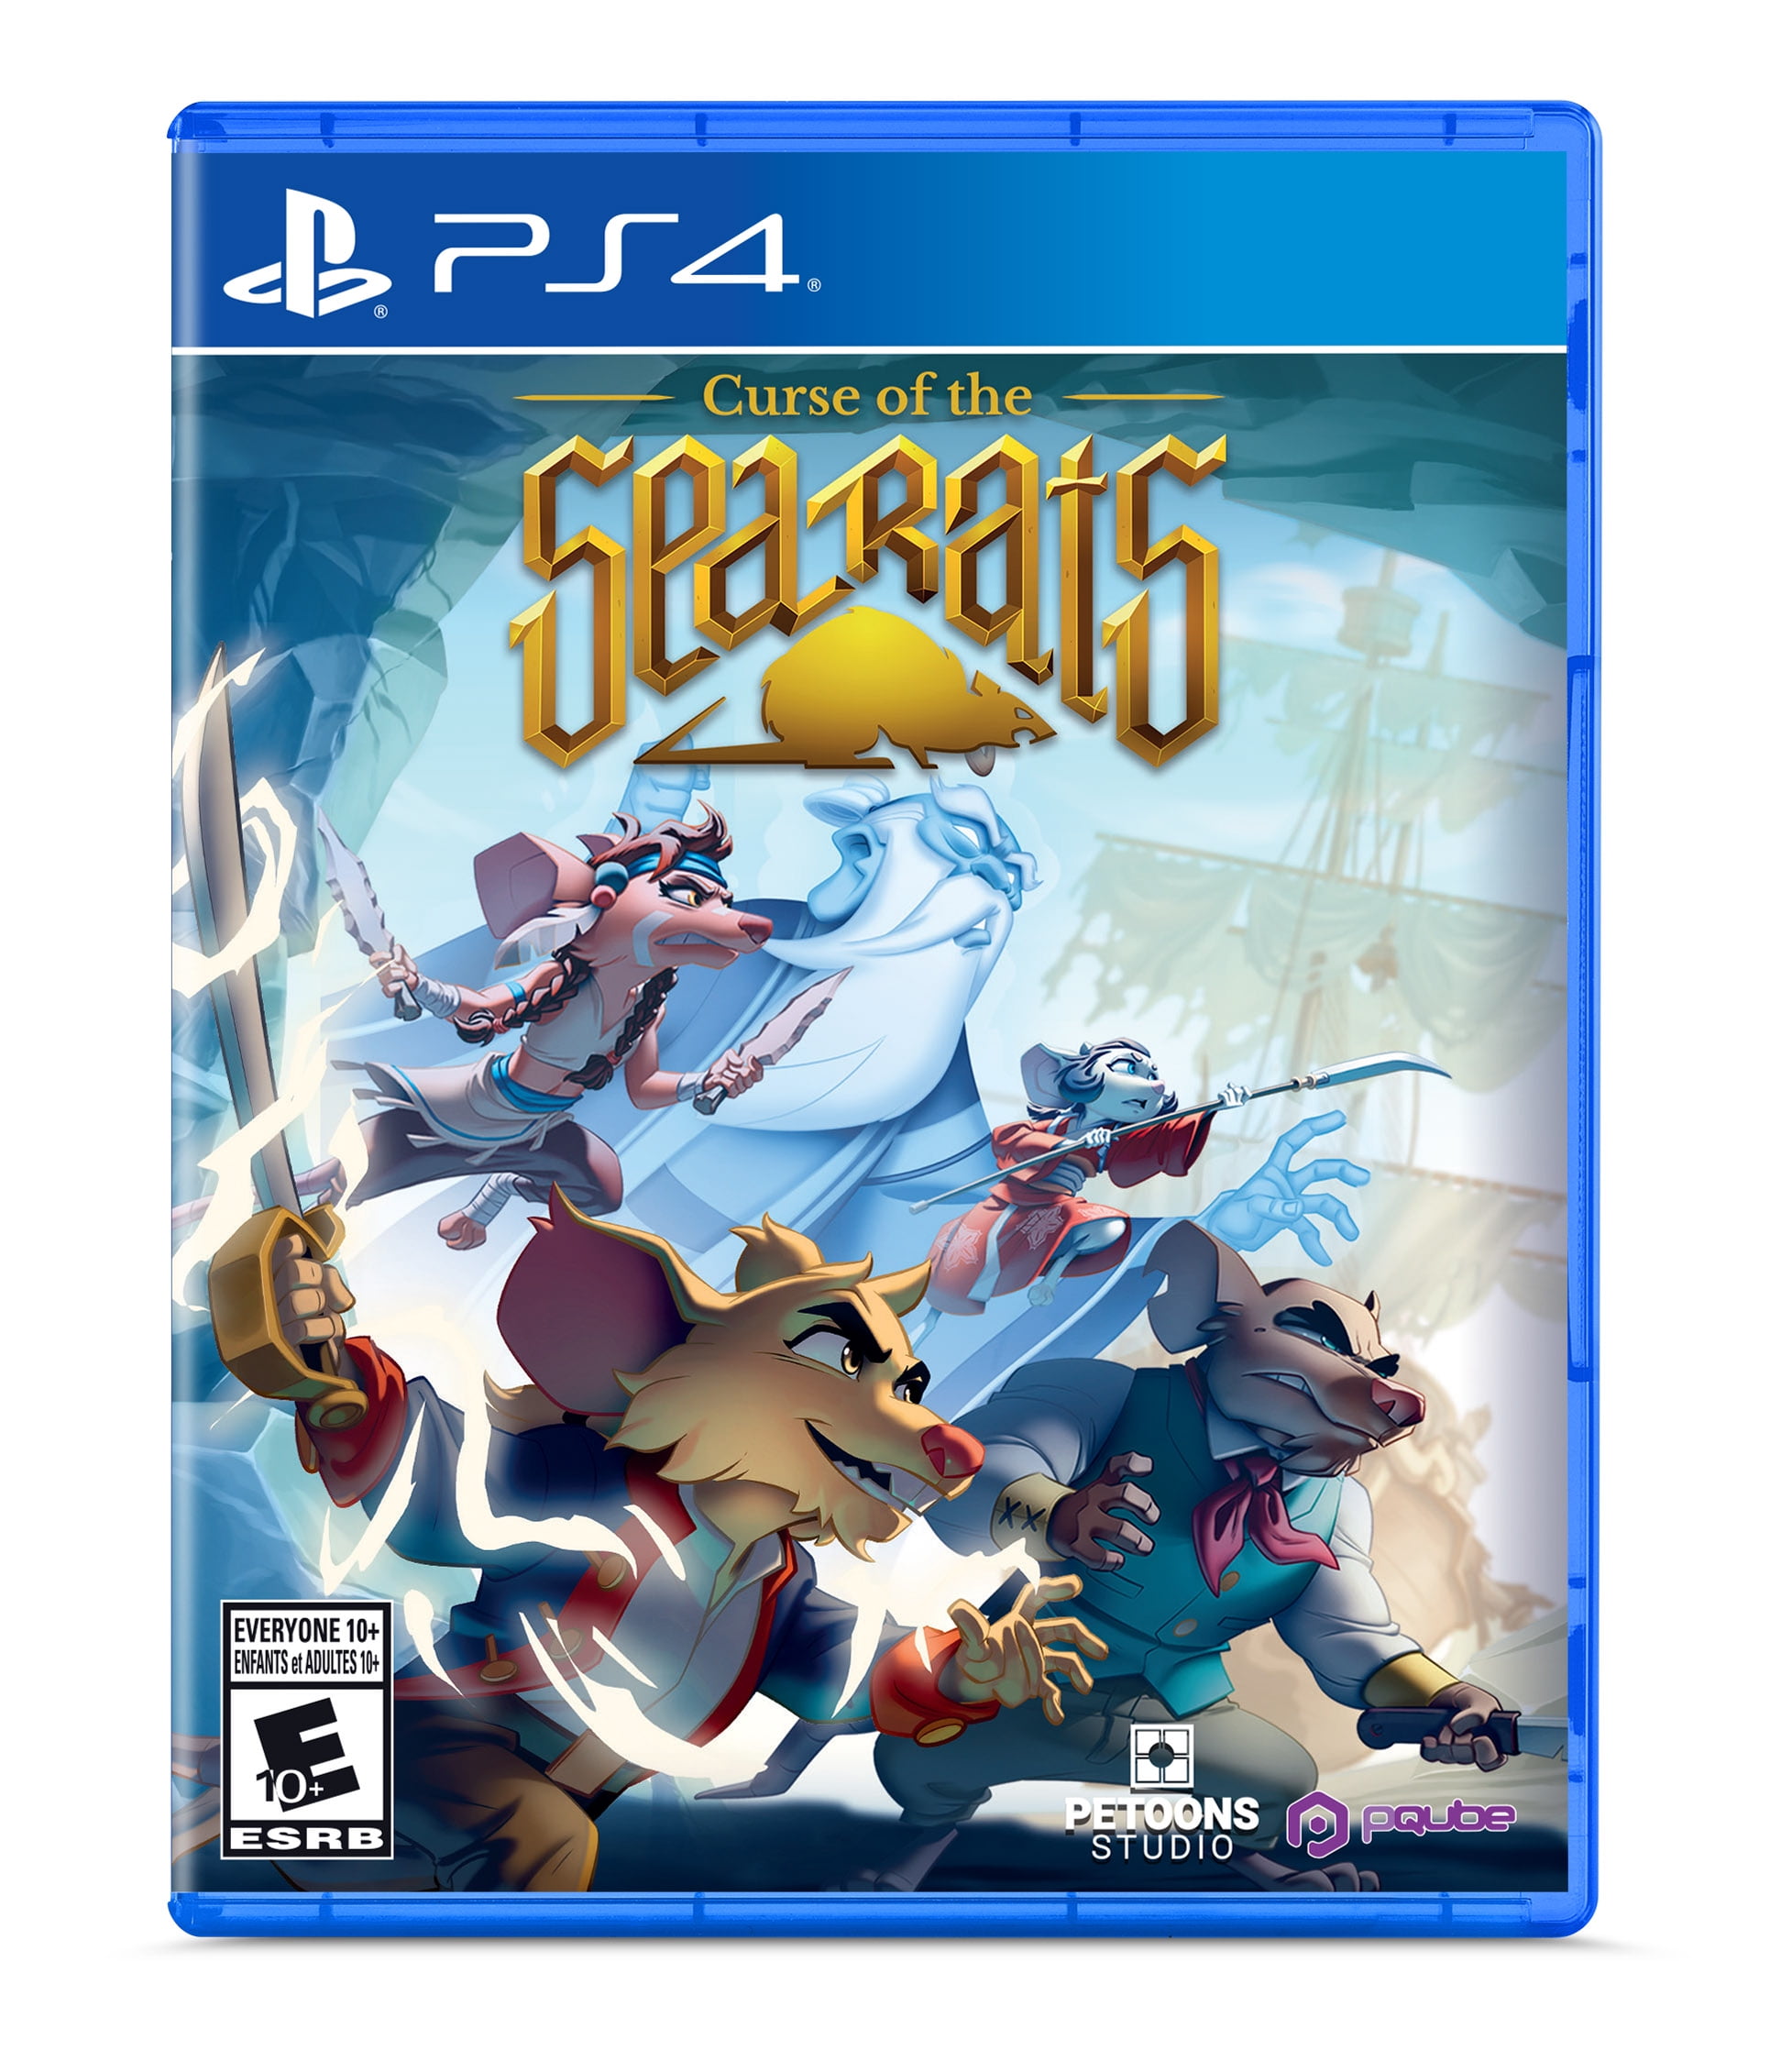 Rats, 4, Edition 814737021487, Curse Sea of Physical PlayStation the Pqube,